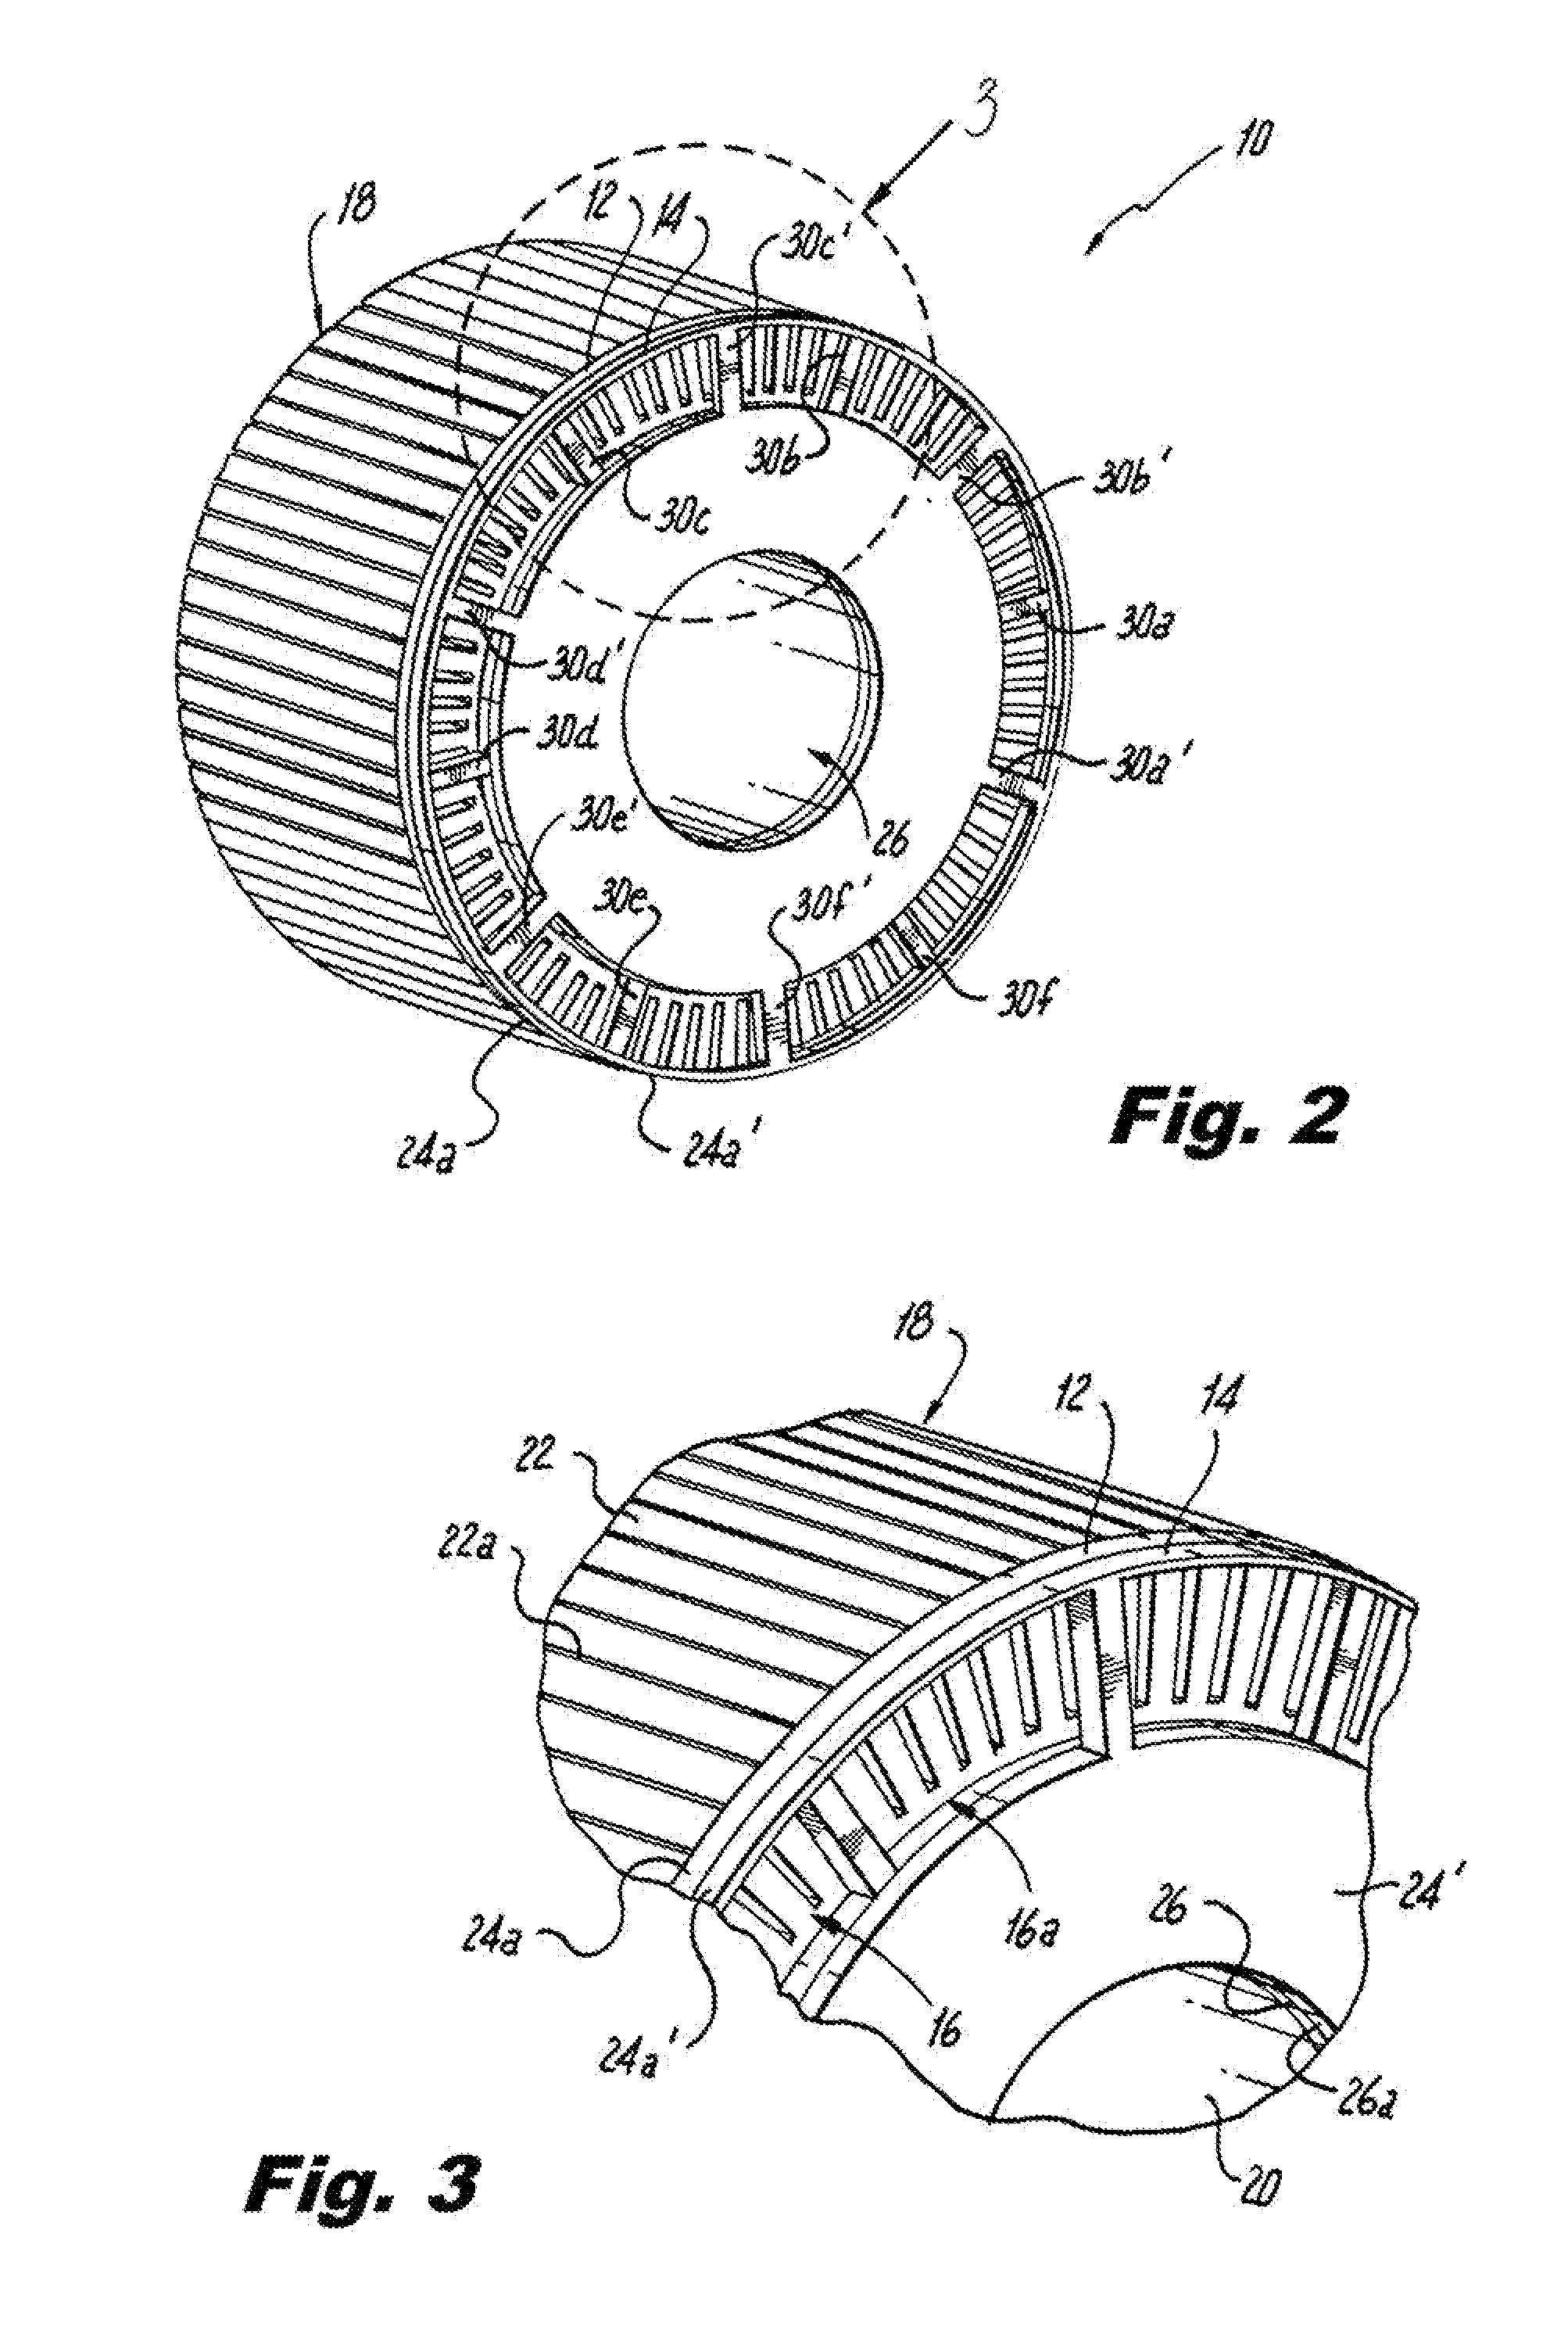 Die Cast Rotor With Steel End Rings to Contain Aluminum